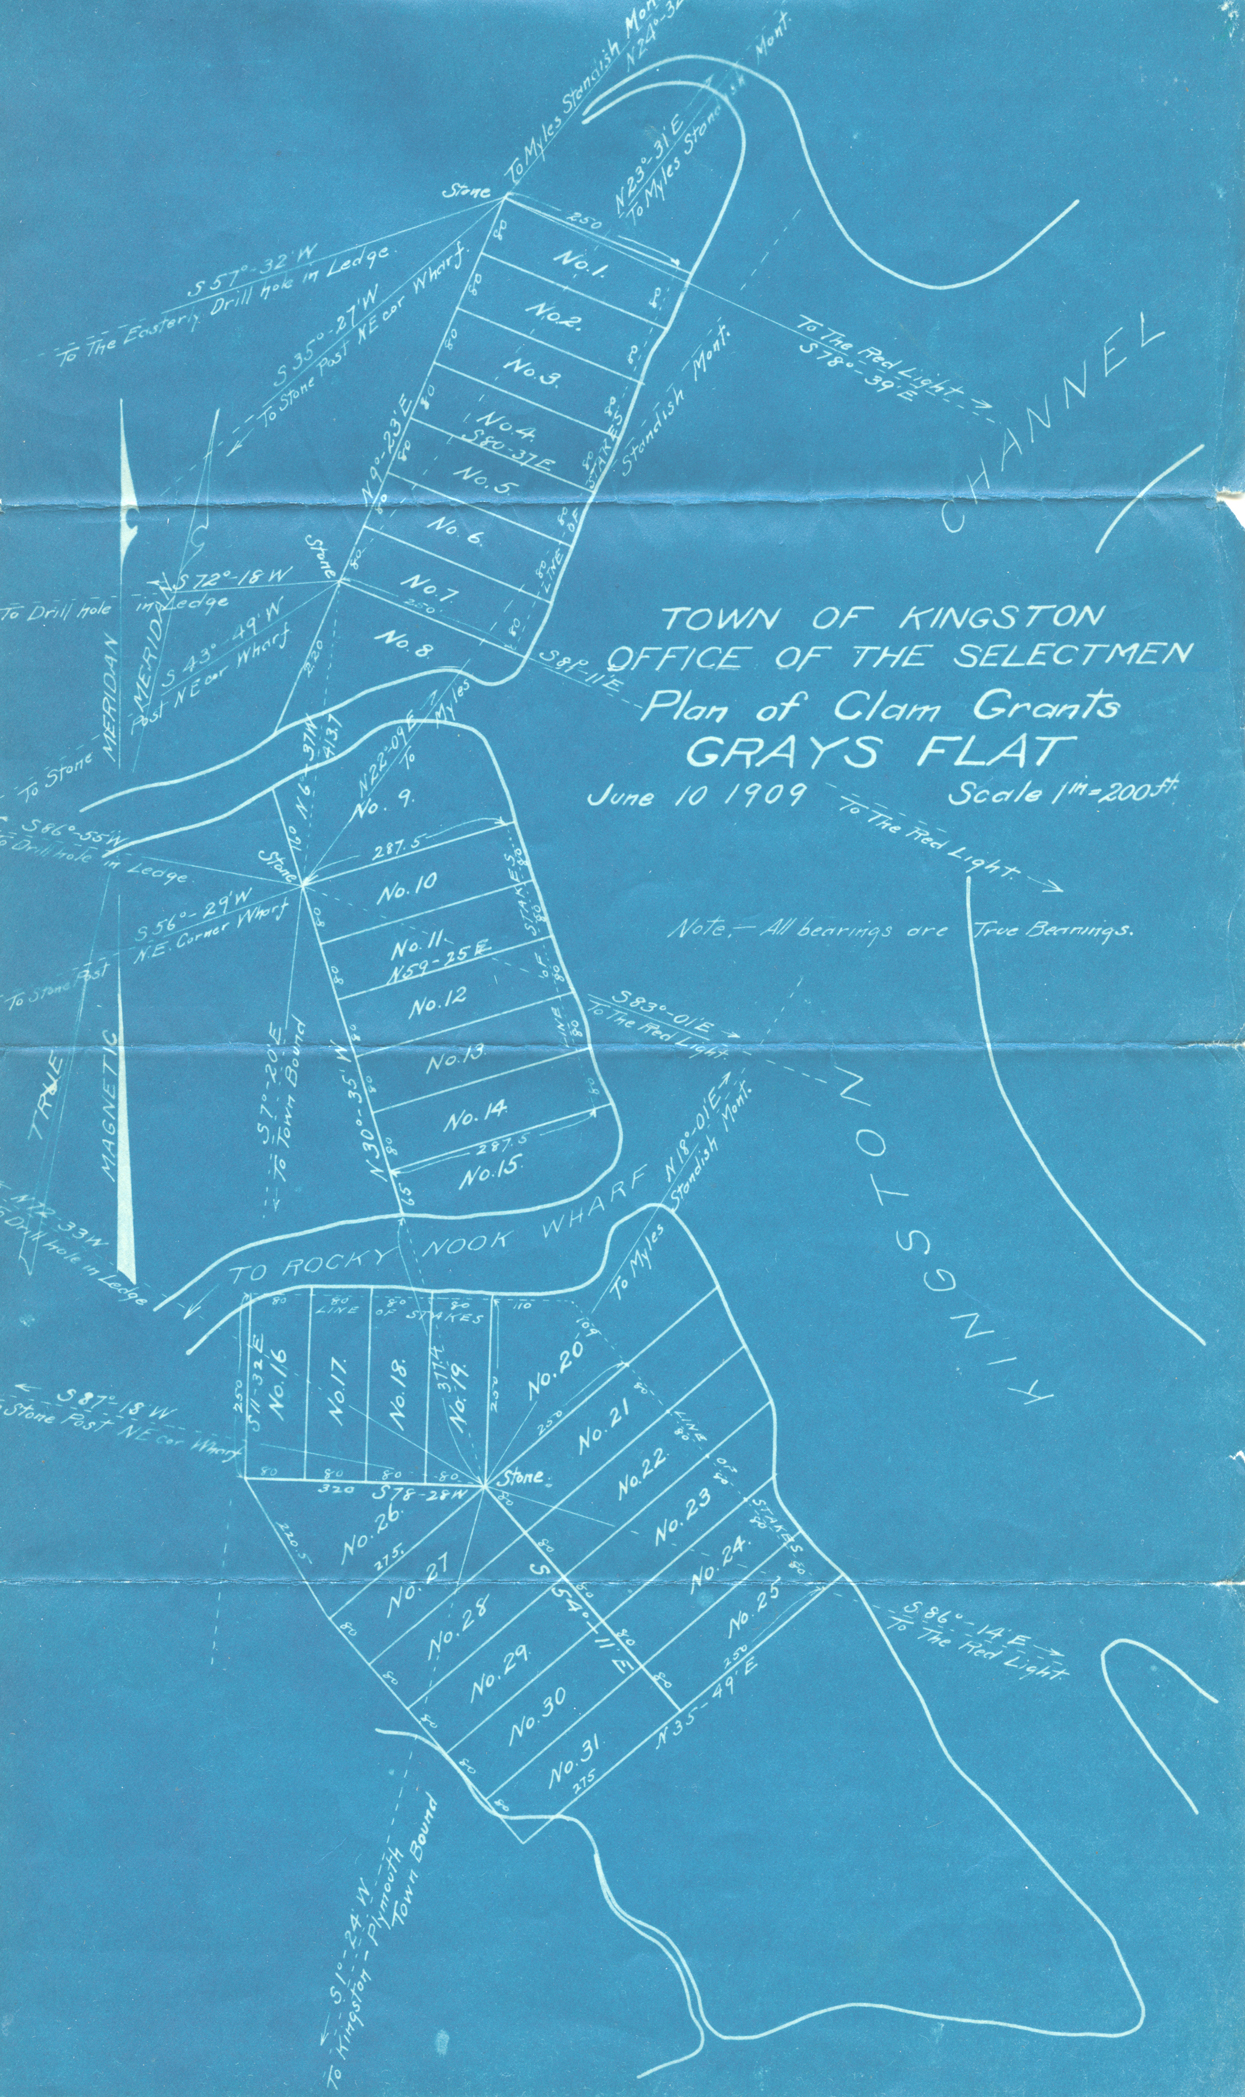 Town of Kingston Plan of Clam Grants, 1909